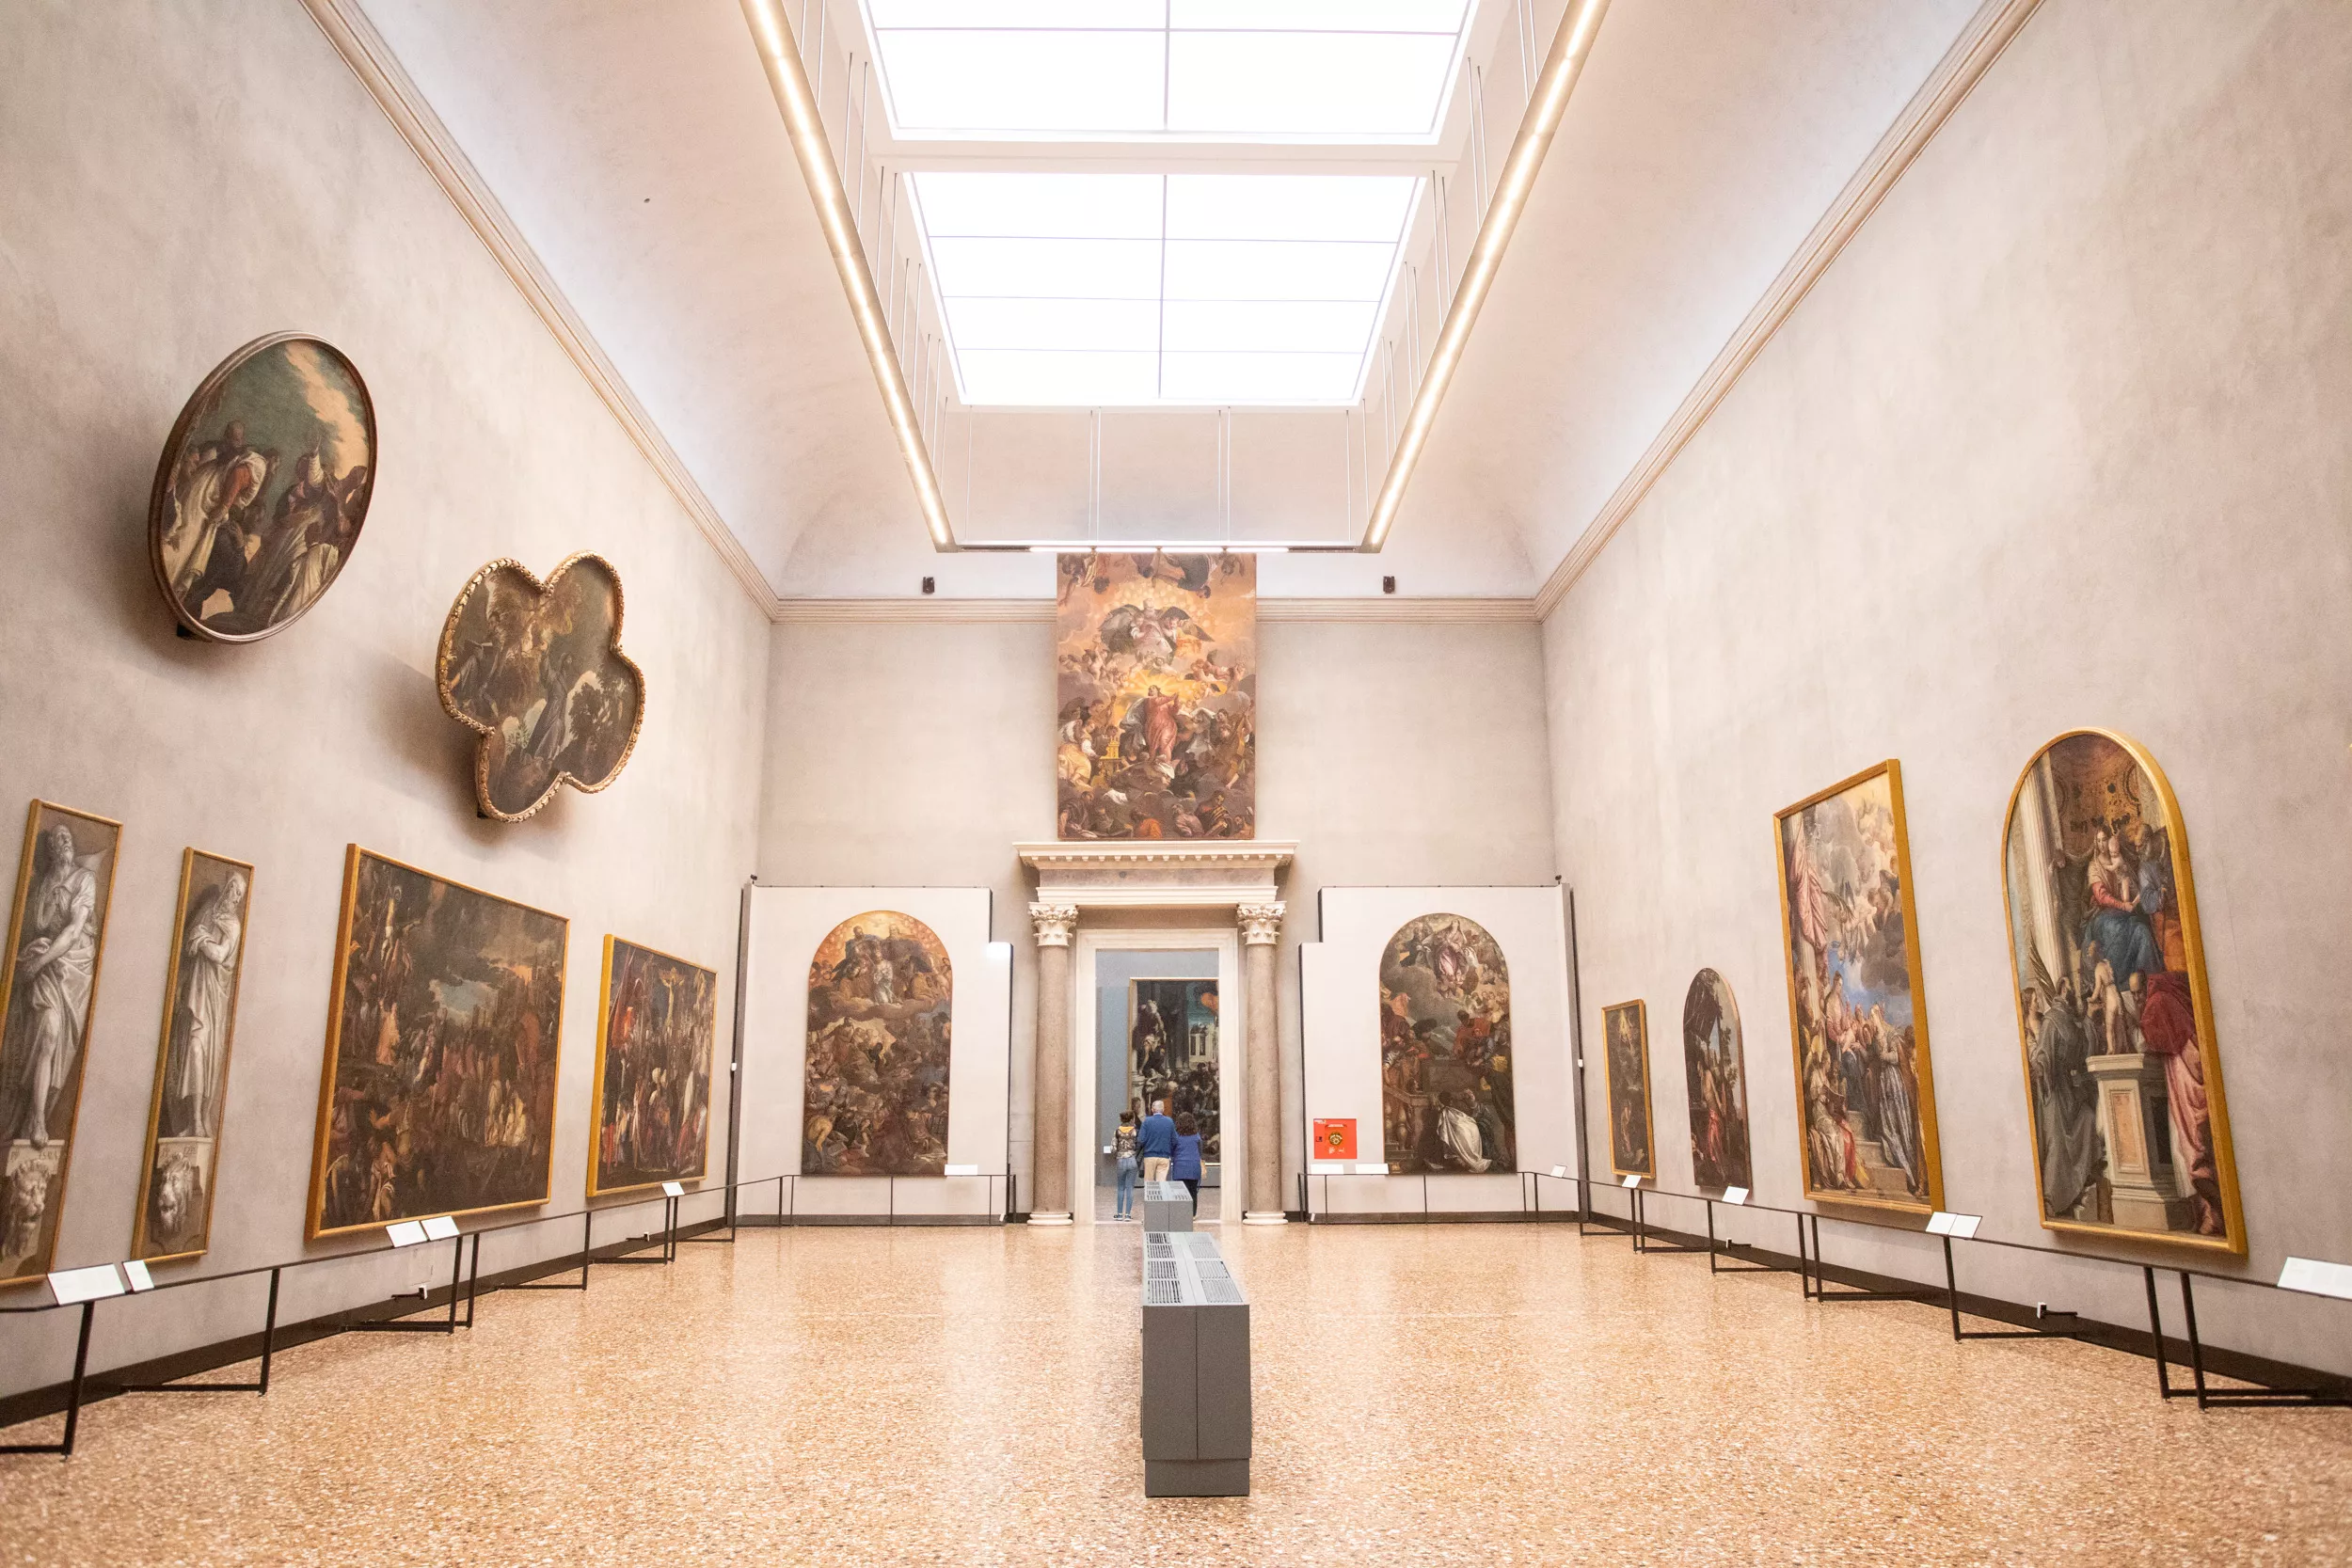 Galleries of the Academy in Italy, Europe | Museums - Rated 3.8